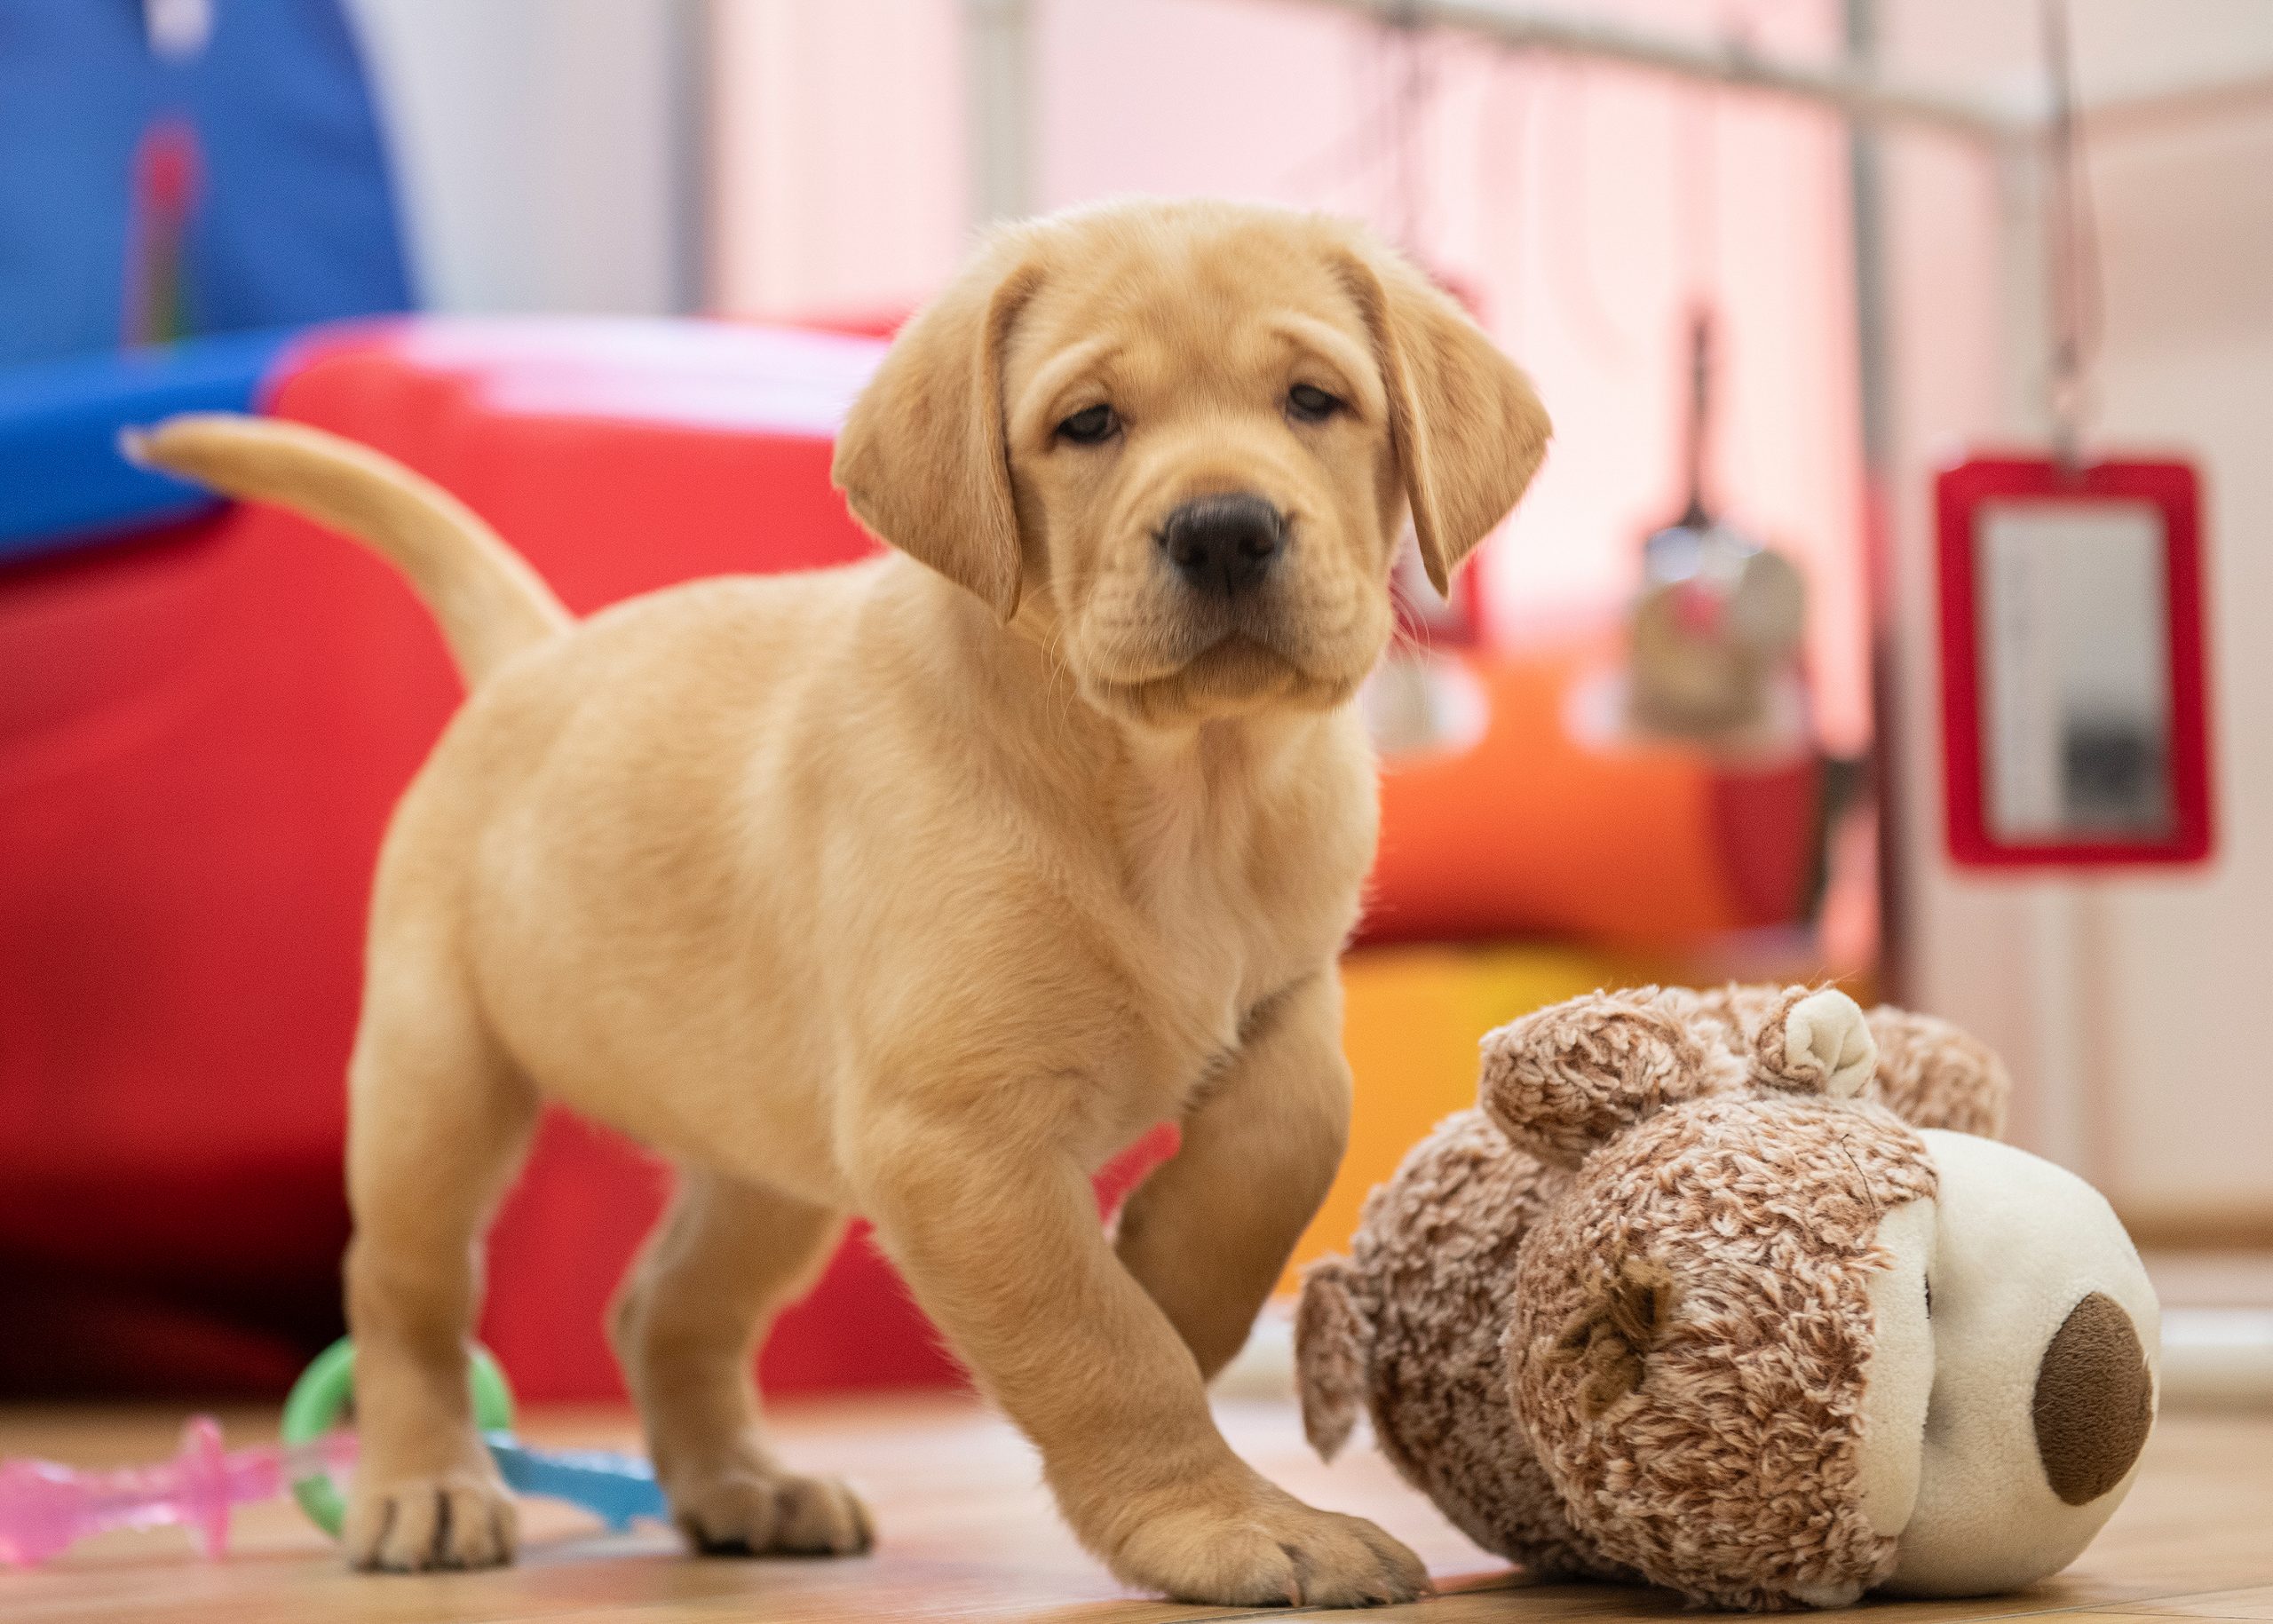 Yellow lab puppy looks at camera and stands next to plush toy